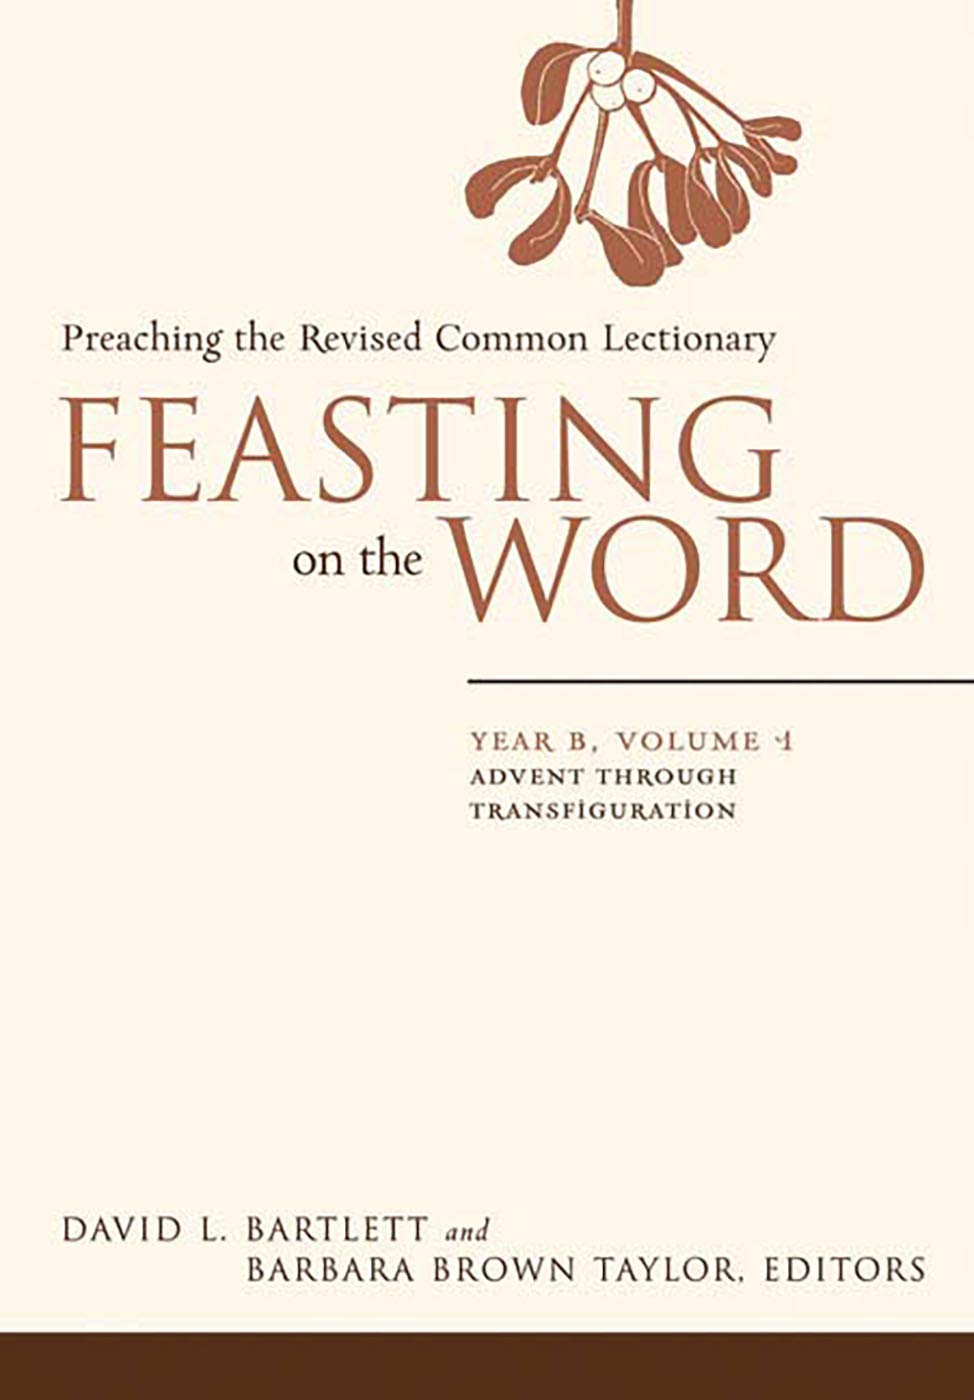 Feasting on the Word: Year B, Volume 1: Advent through Transfiguration (Feasting on the Word: Year B volume)